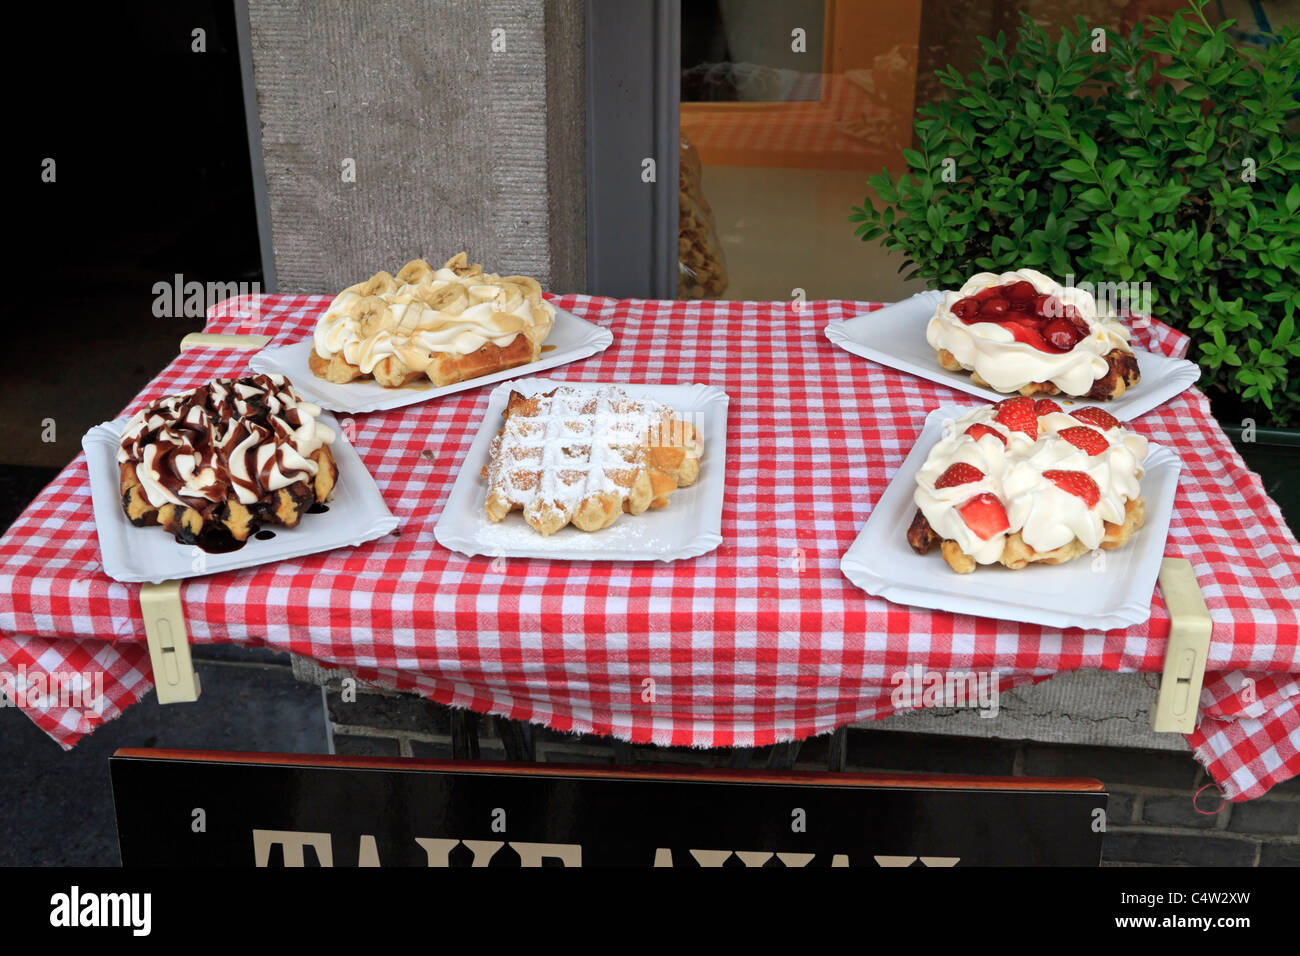 Assortment of Belgian waffles on display outside a restaurant in Bruges, Belgium Stock Photo